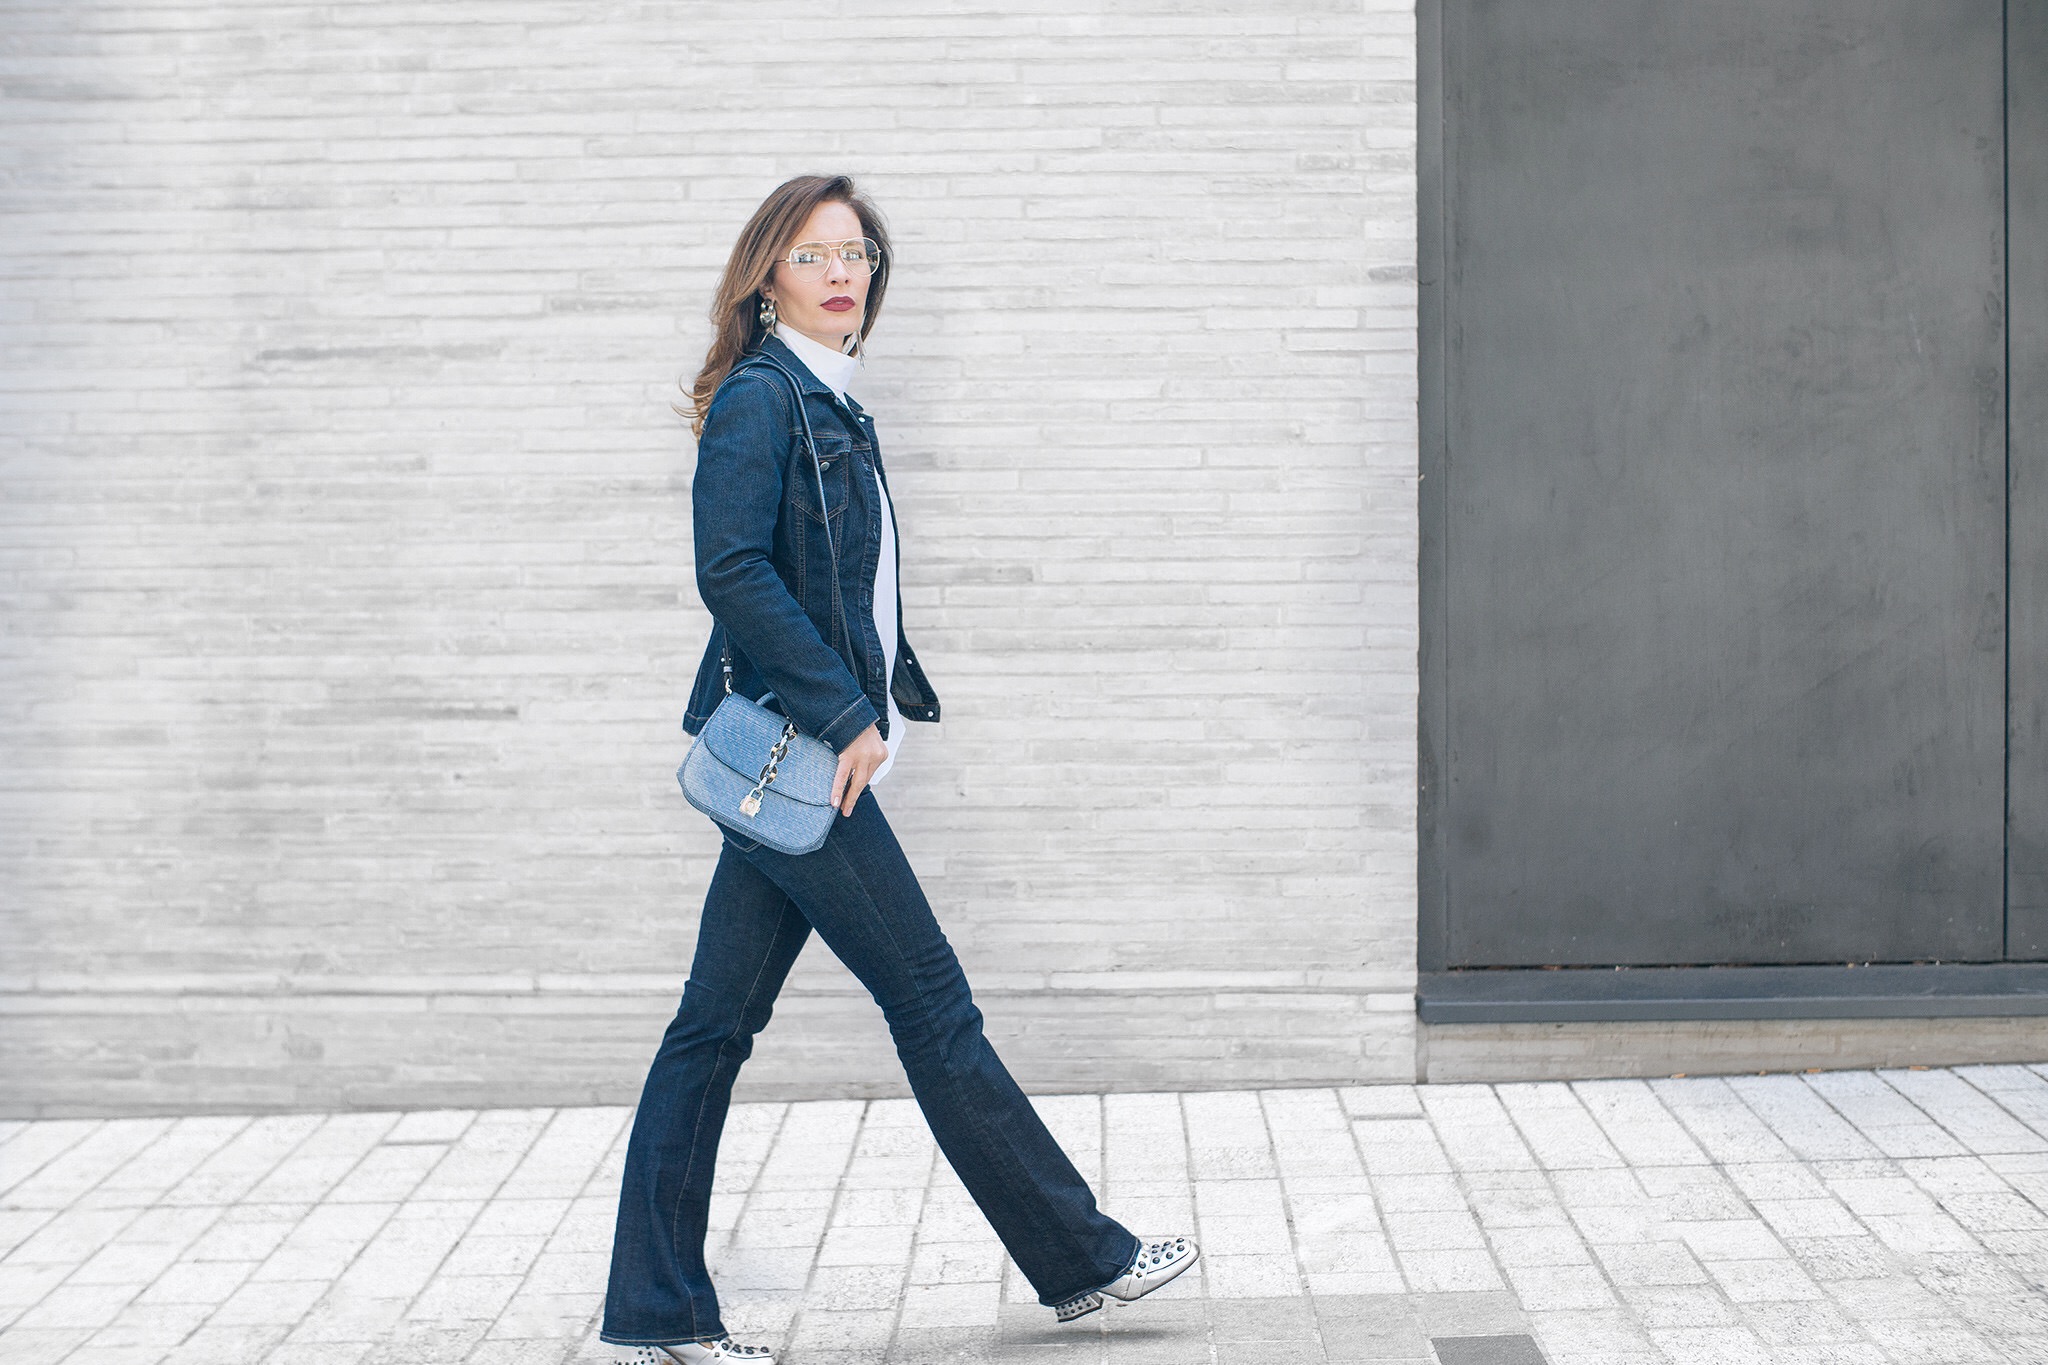 Double denim and how to wear it to look chic